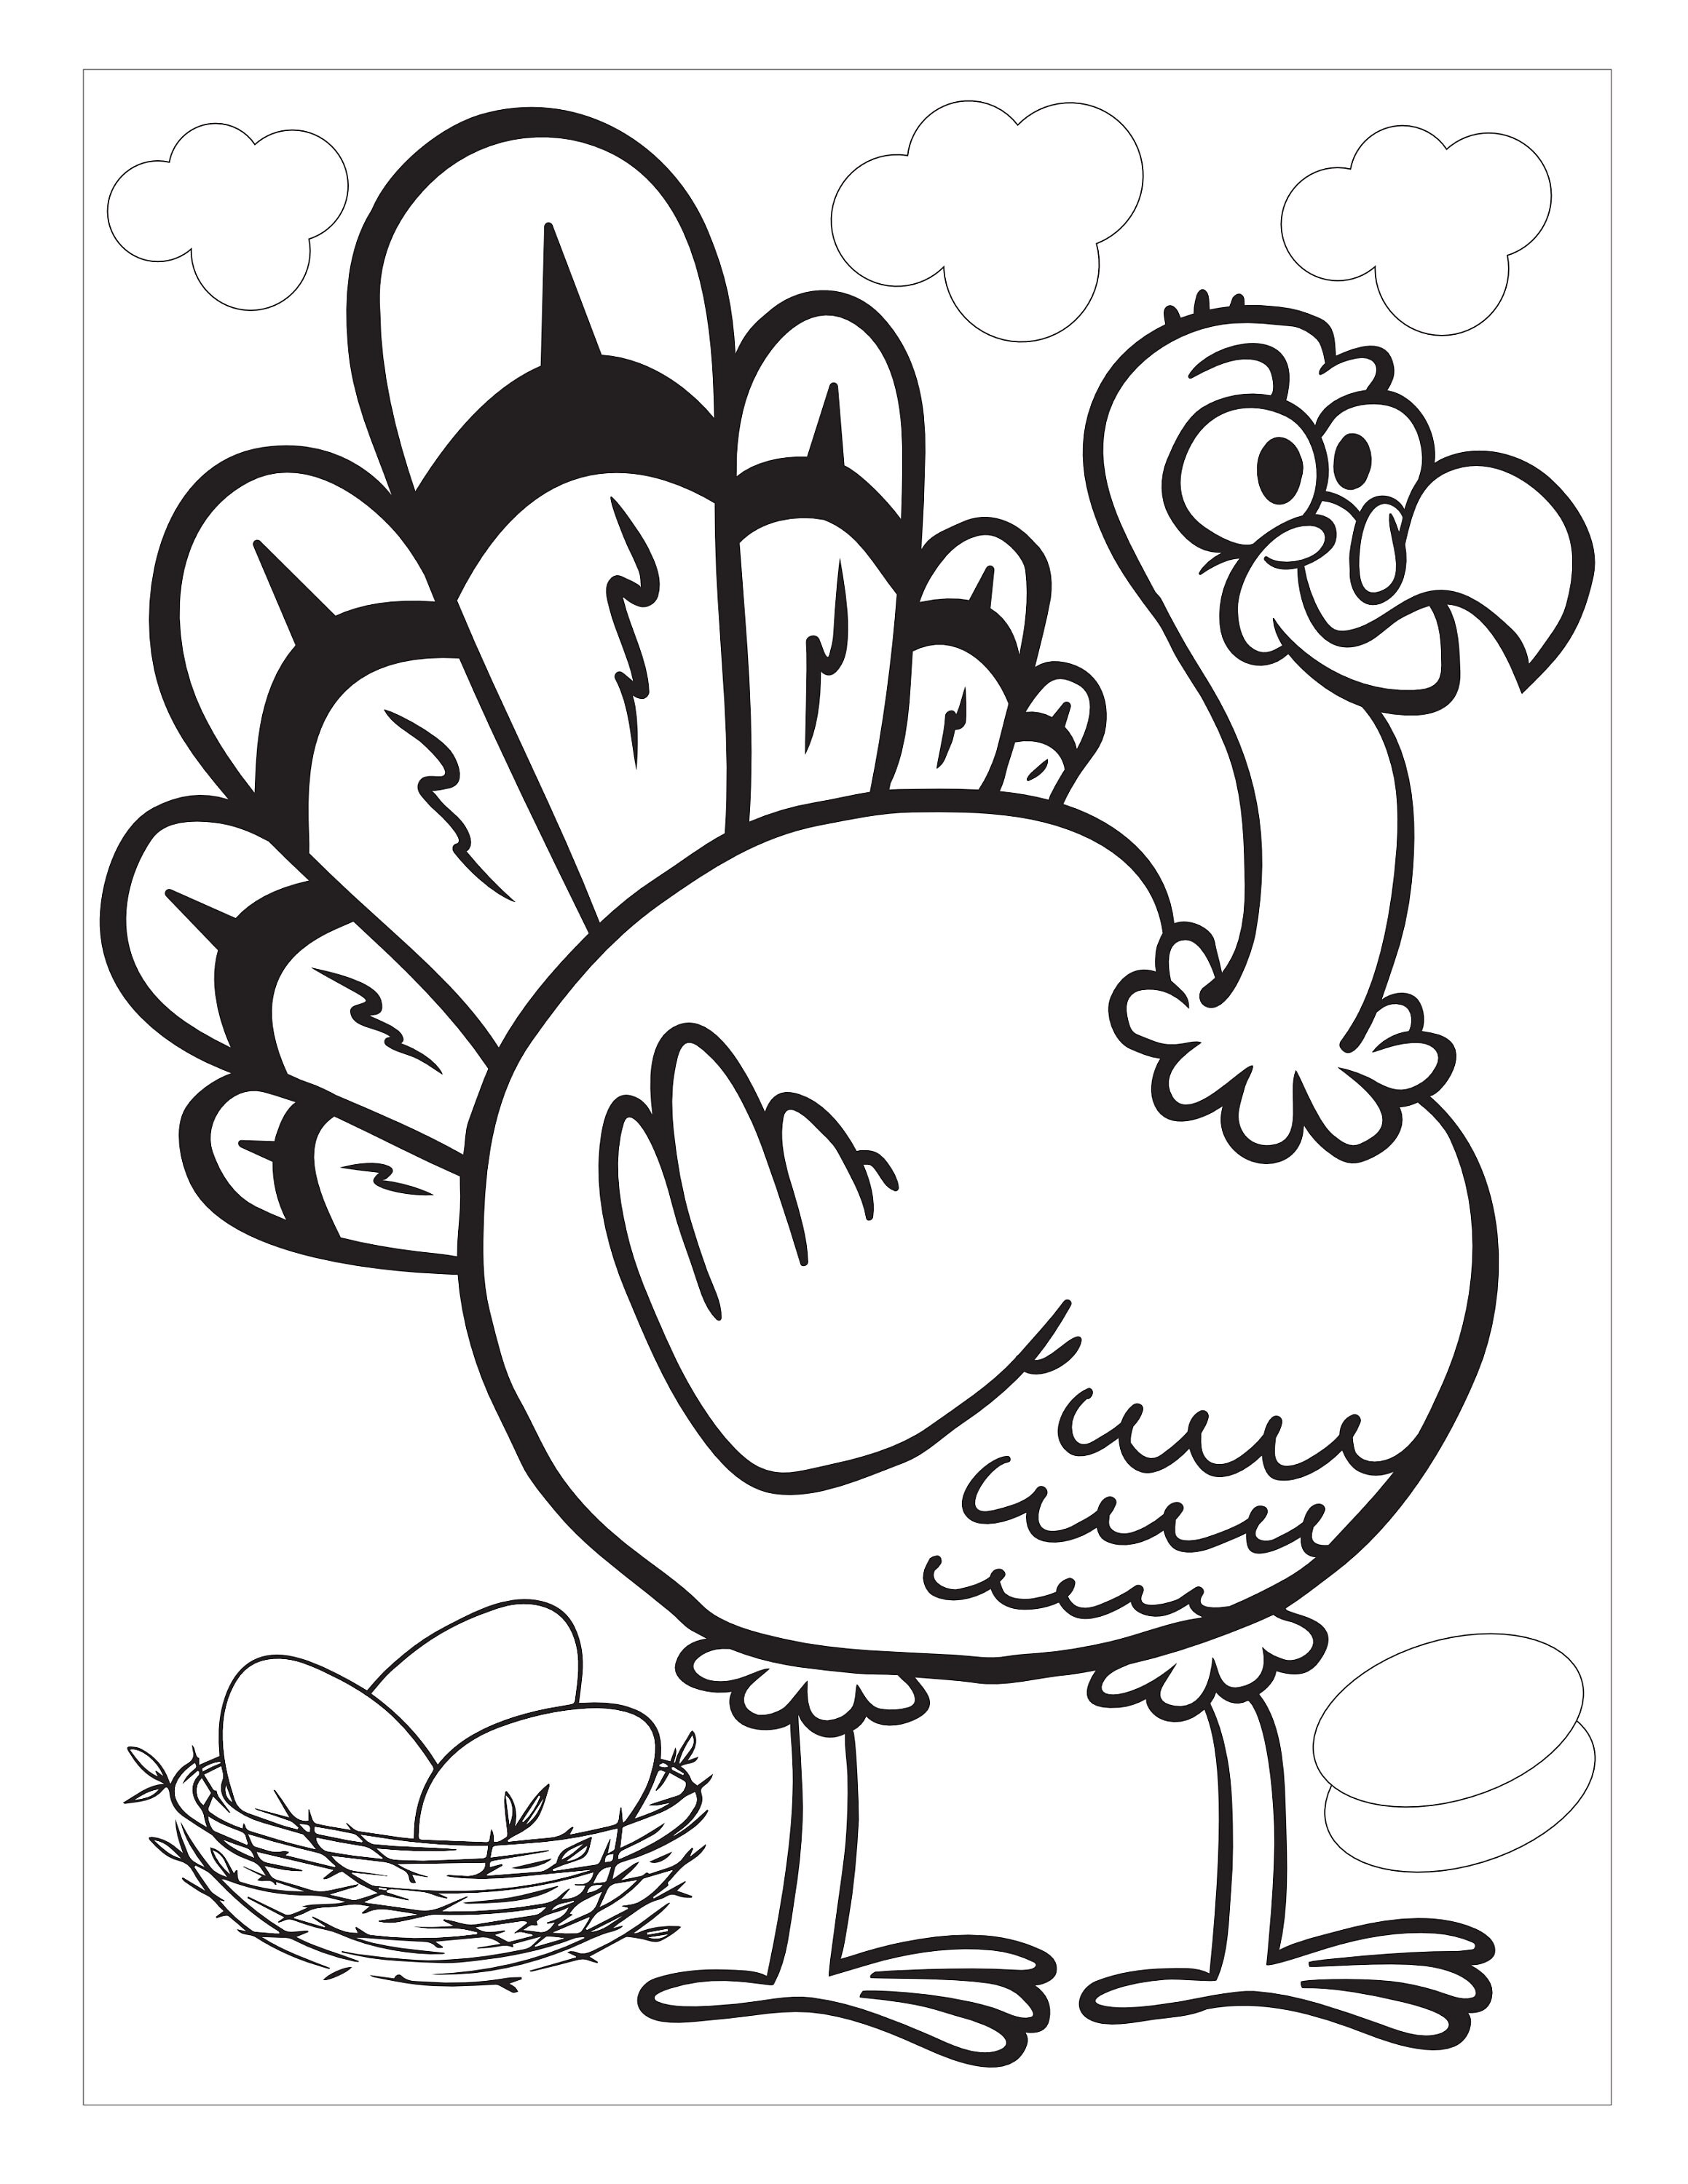 Thanksgiving Coloring Books For Kids : Funny Animals Coloring Pages For  Children, Preschool, Kindergarten Age 3-5 - J K Mimo - 9781707828302 